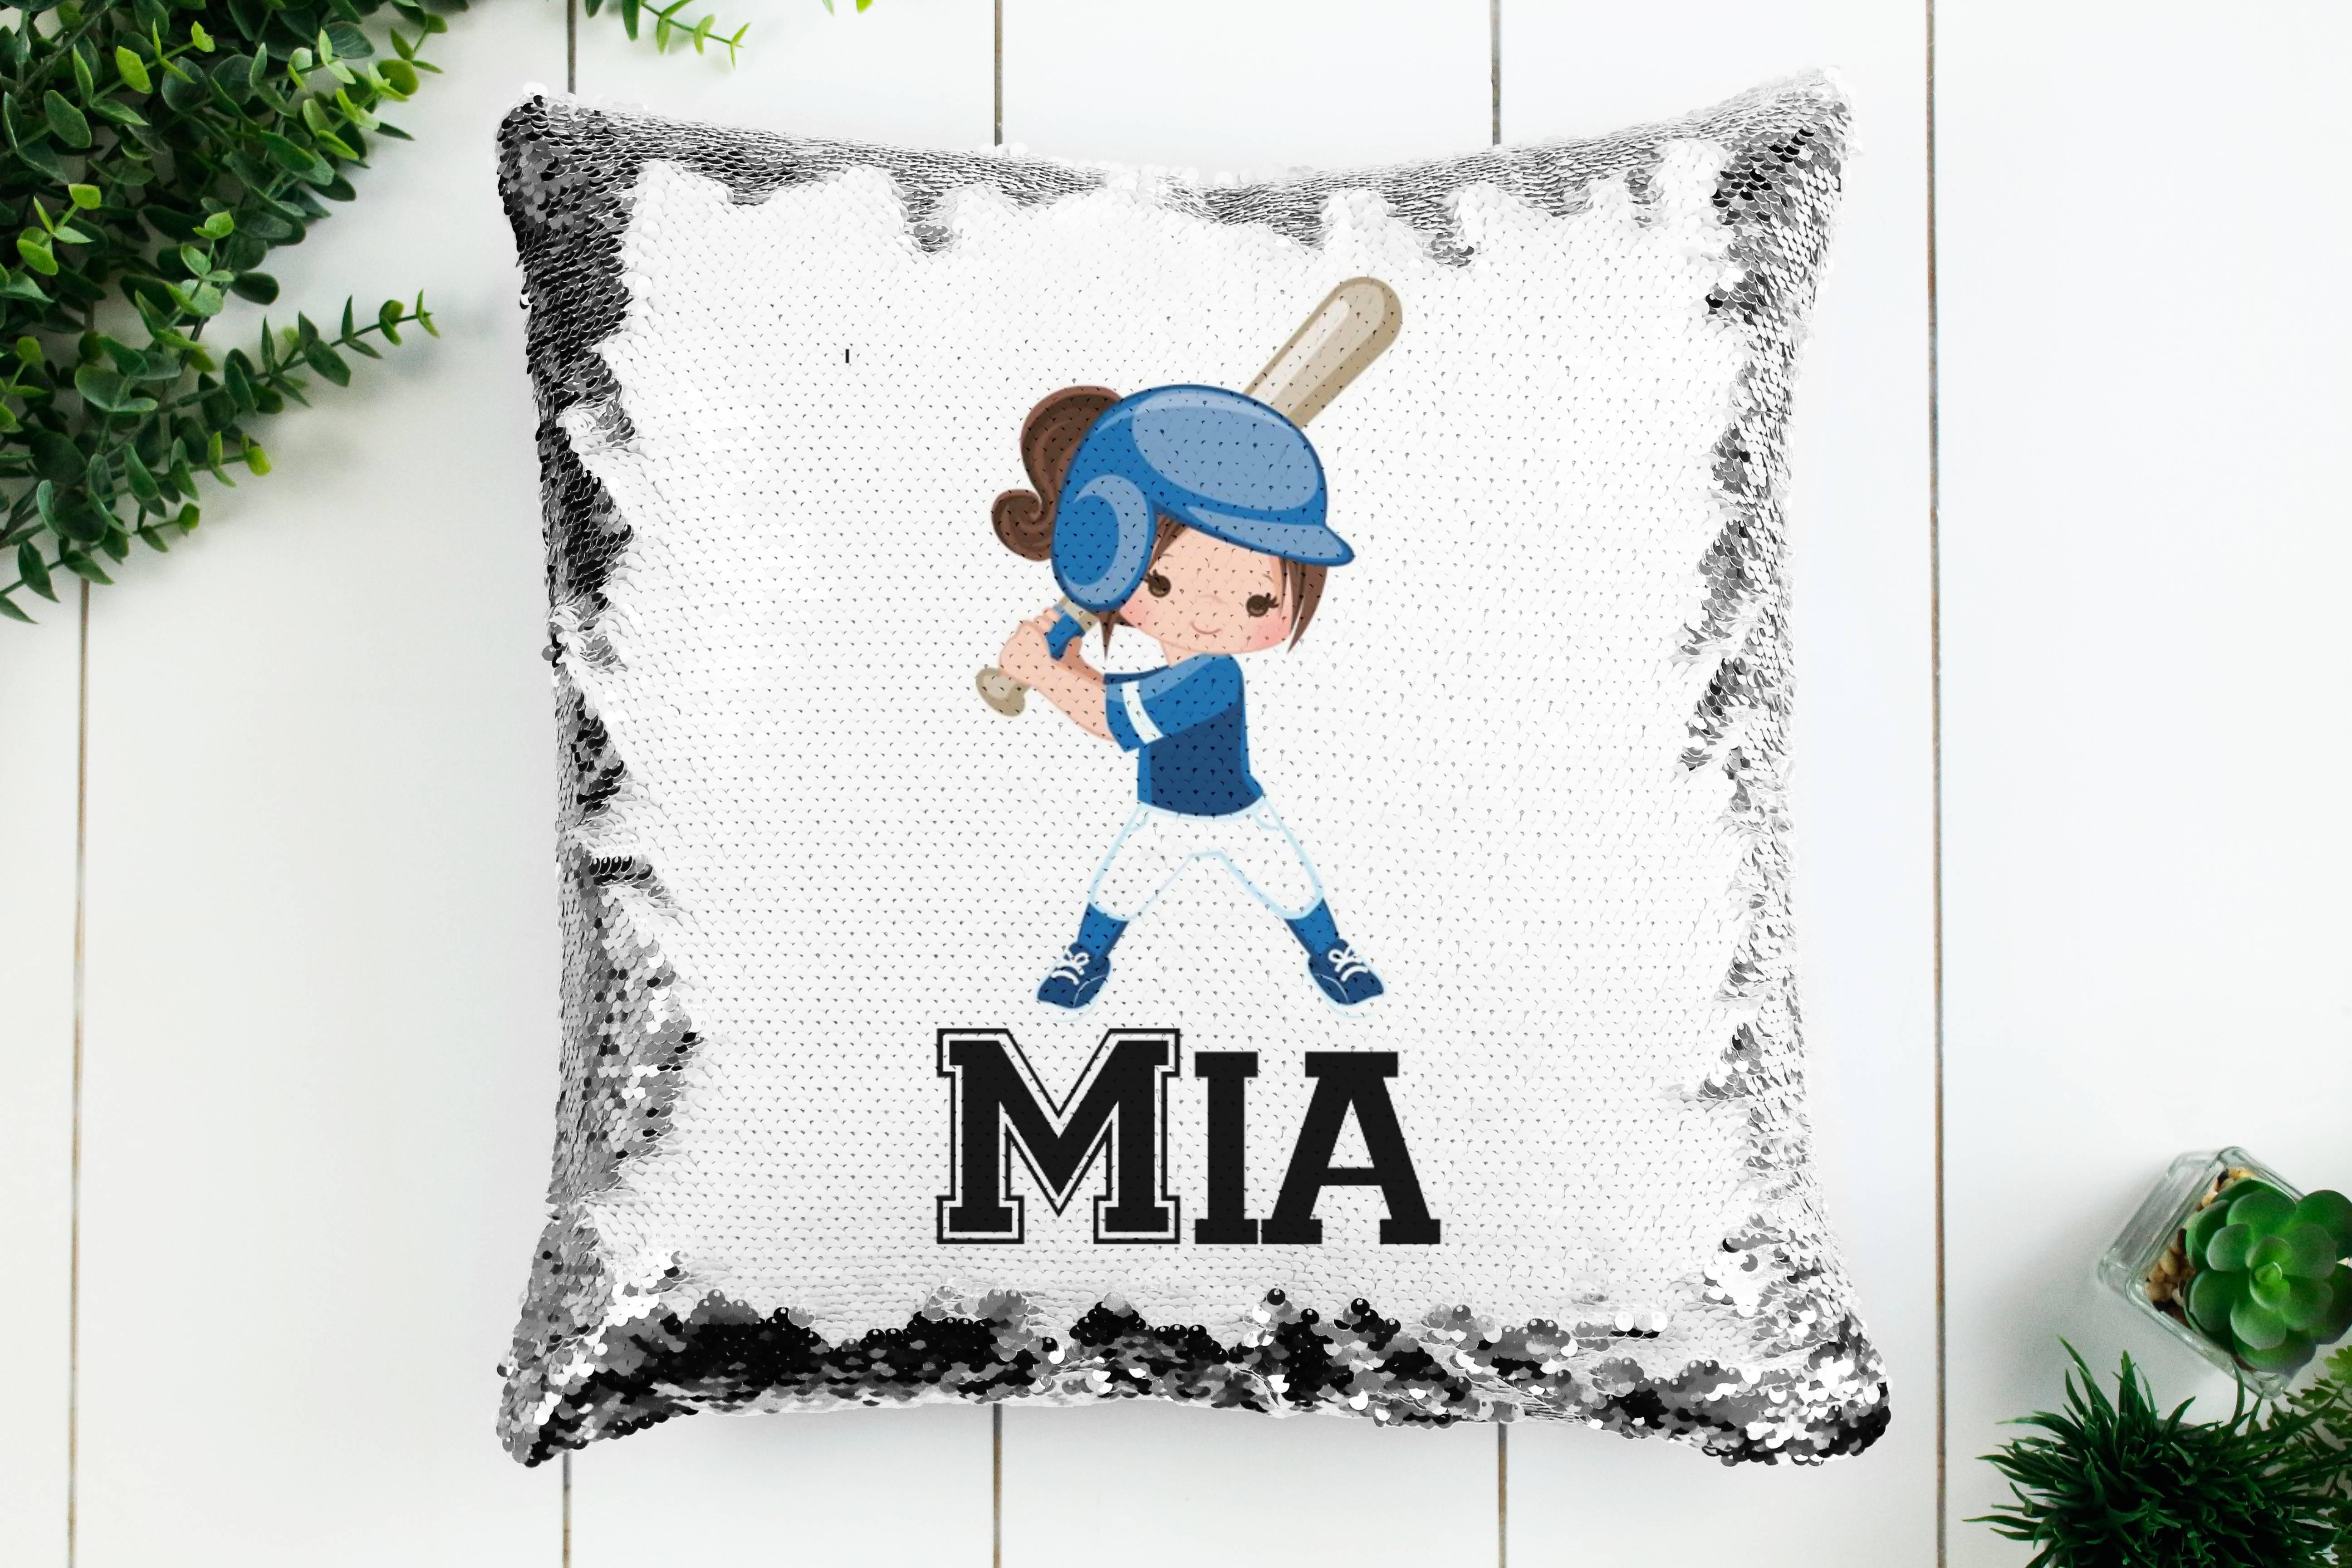 Softball and Sports Birthday Gift for Girls, Softball  pillow case personalized Sequin Throw Pillowcase Custom Reversible Pillow Decorative Cushion Pillow Cover  lover gift  | Gift for child with Sensory Needs and or Autism | Gift for 5 year old Girls | Gift for Girls | Gift for 2 3 4 5 6 year old girls | Personalized Sequin Decor  | Birthday Girl Gift Personalized Pillow for Girls | Gift for Birthday Theme Party Supplies